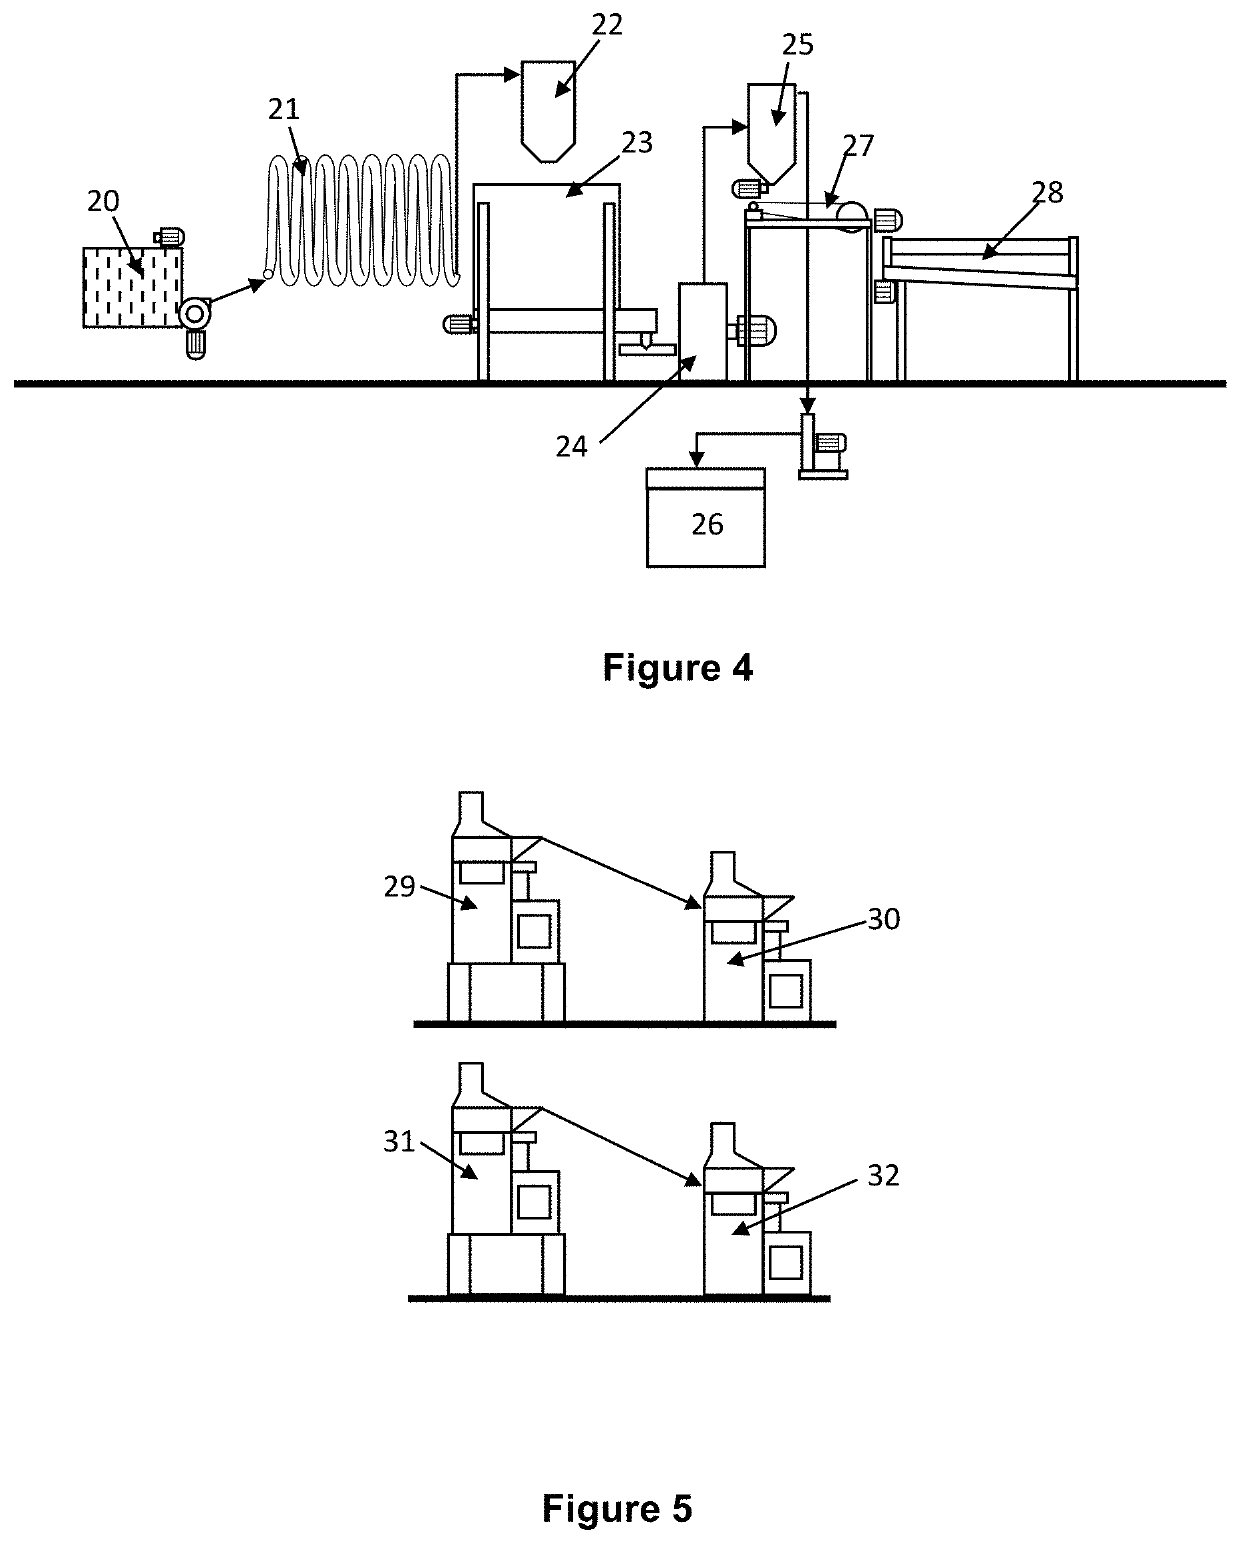 System for physical-mechanical recovery and refining of non-ferrous metals from electronic scrap